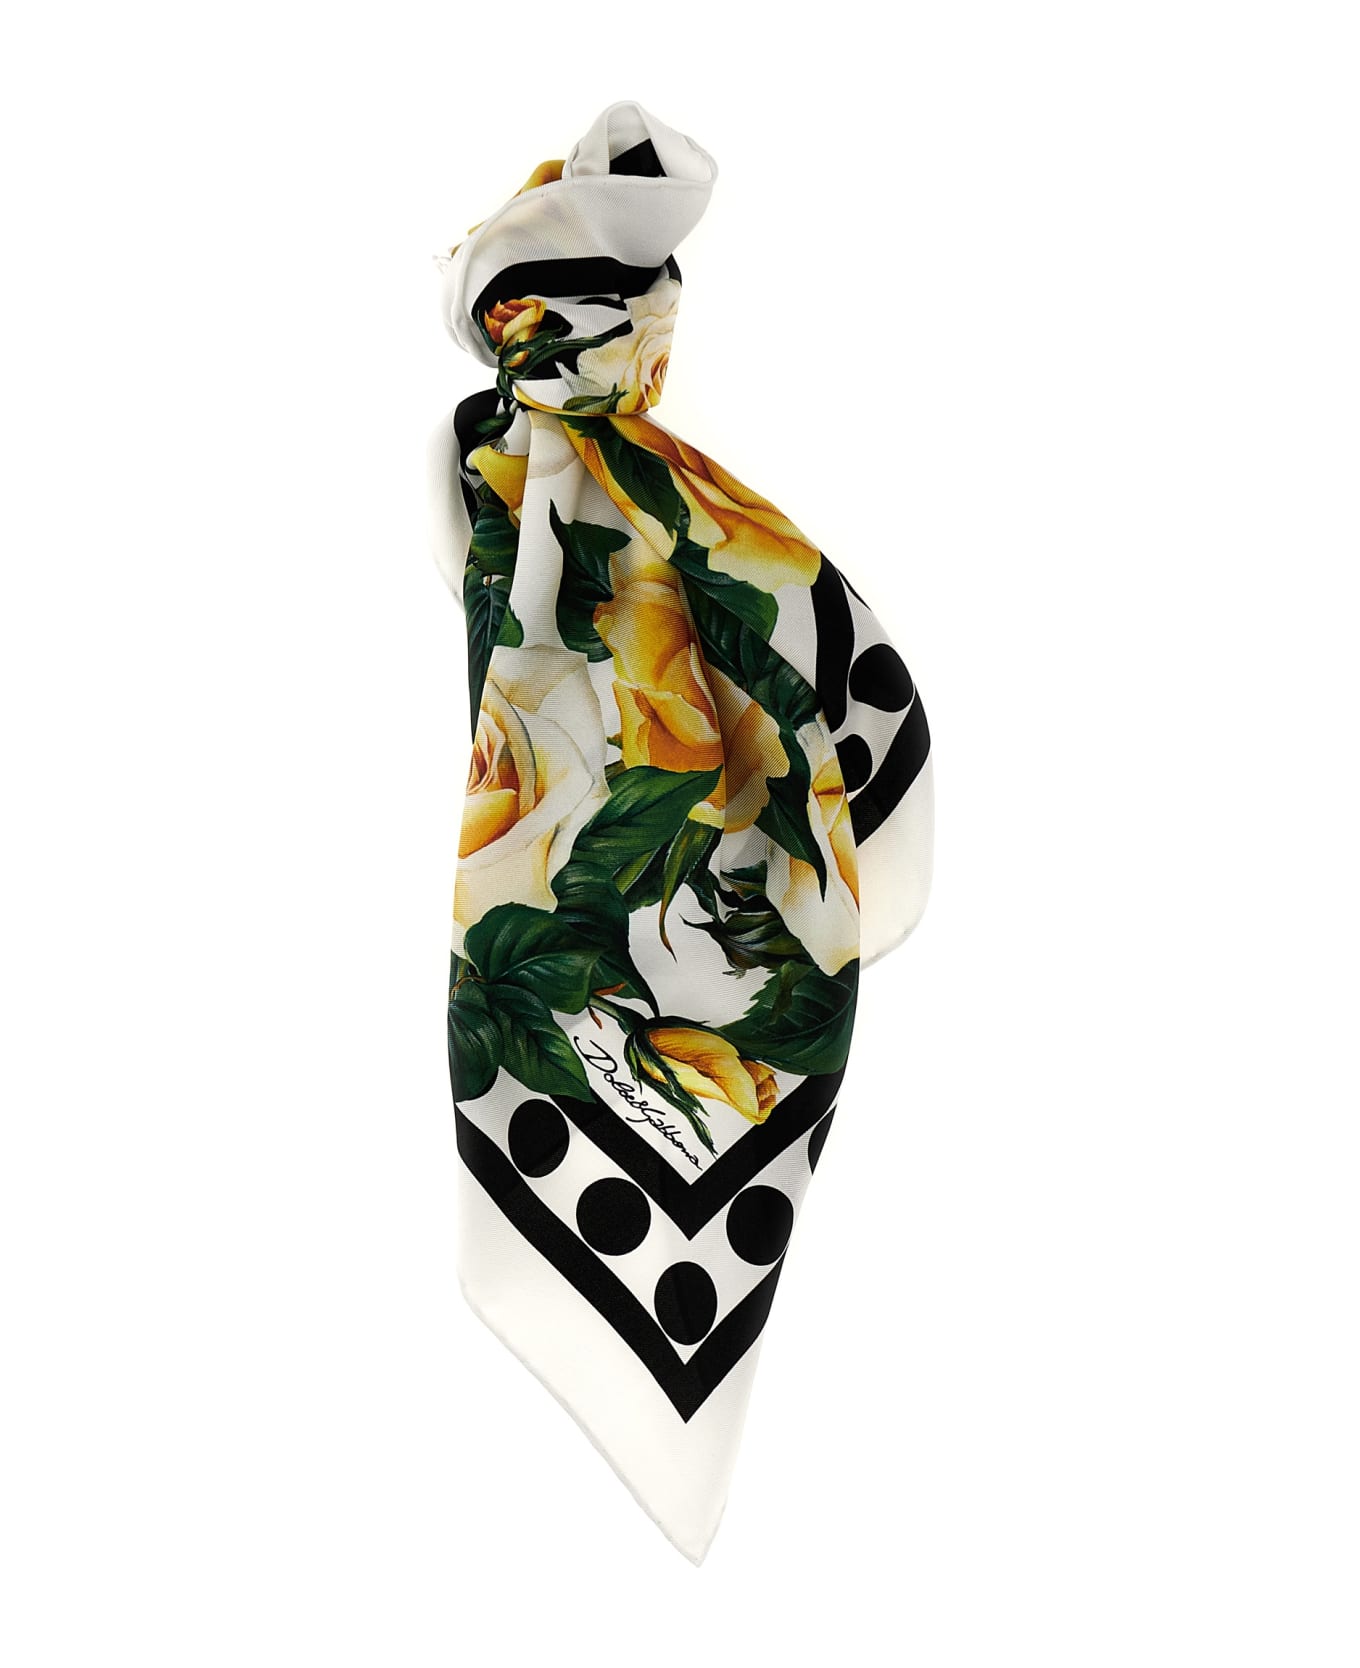 Dolce Roll & Gabbana 'rose Gialle' Scarf - Multicolor